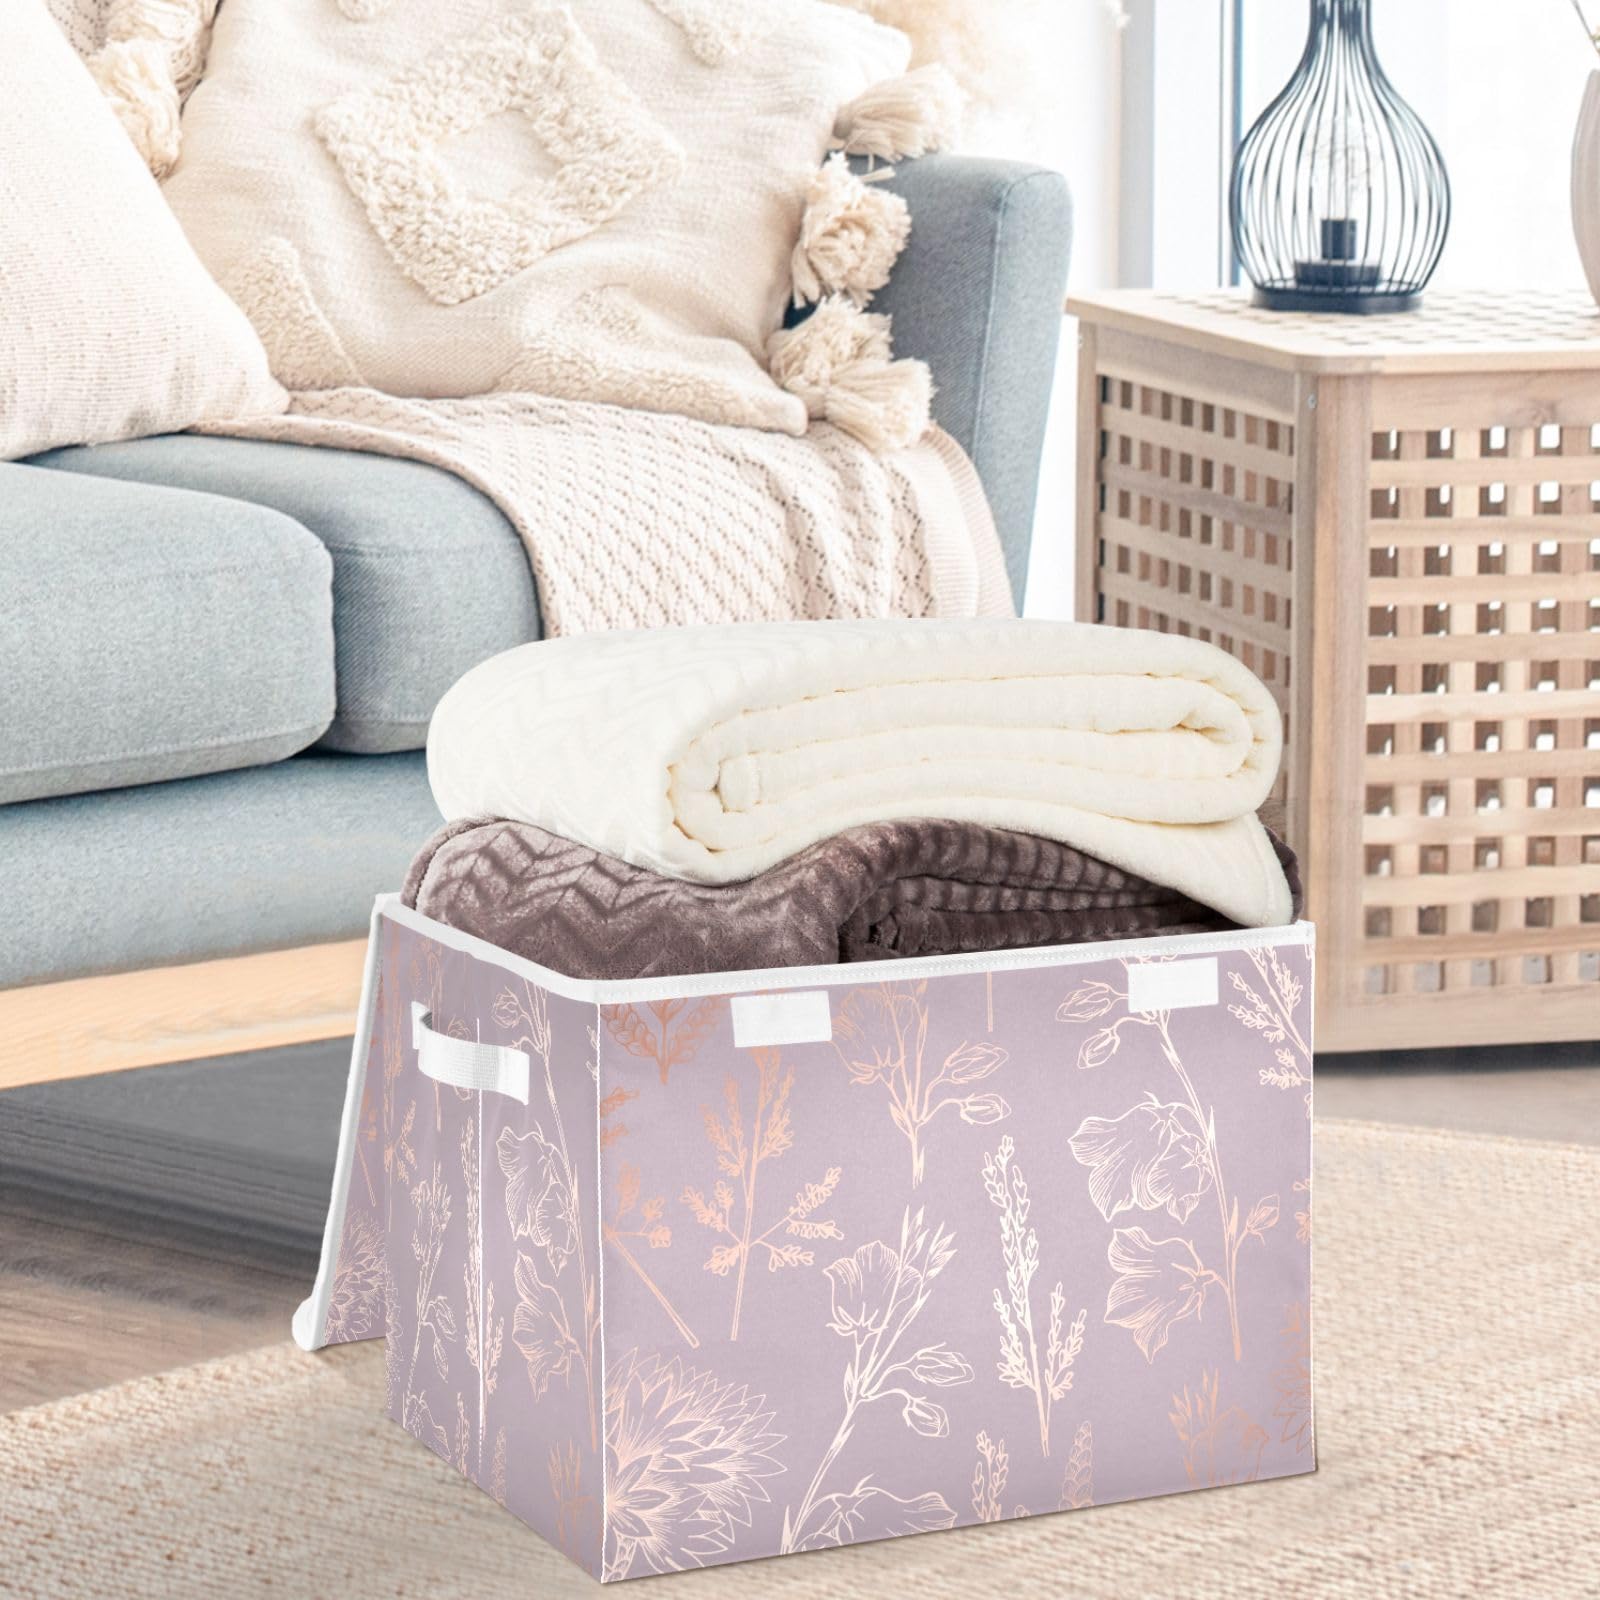 CaTaKu Large Fabric Storage Bins With Lids,Rose Gold Floral Storage Boxes With Handles for Organizing Clothes, Collapsible Storage Cube Bins Baskets for Shelves